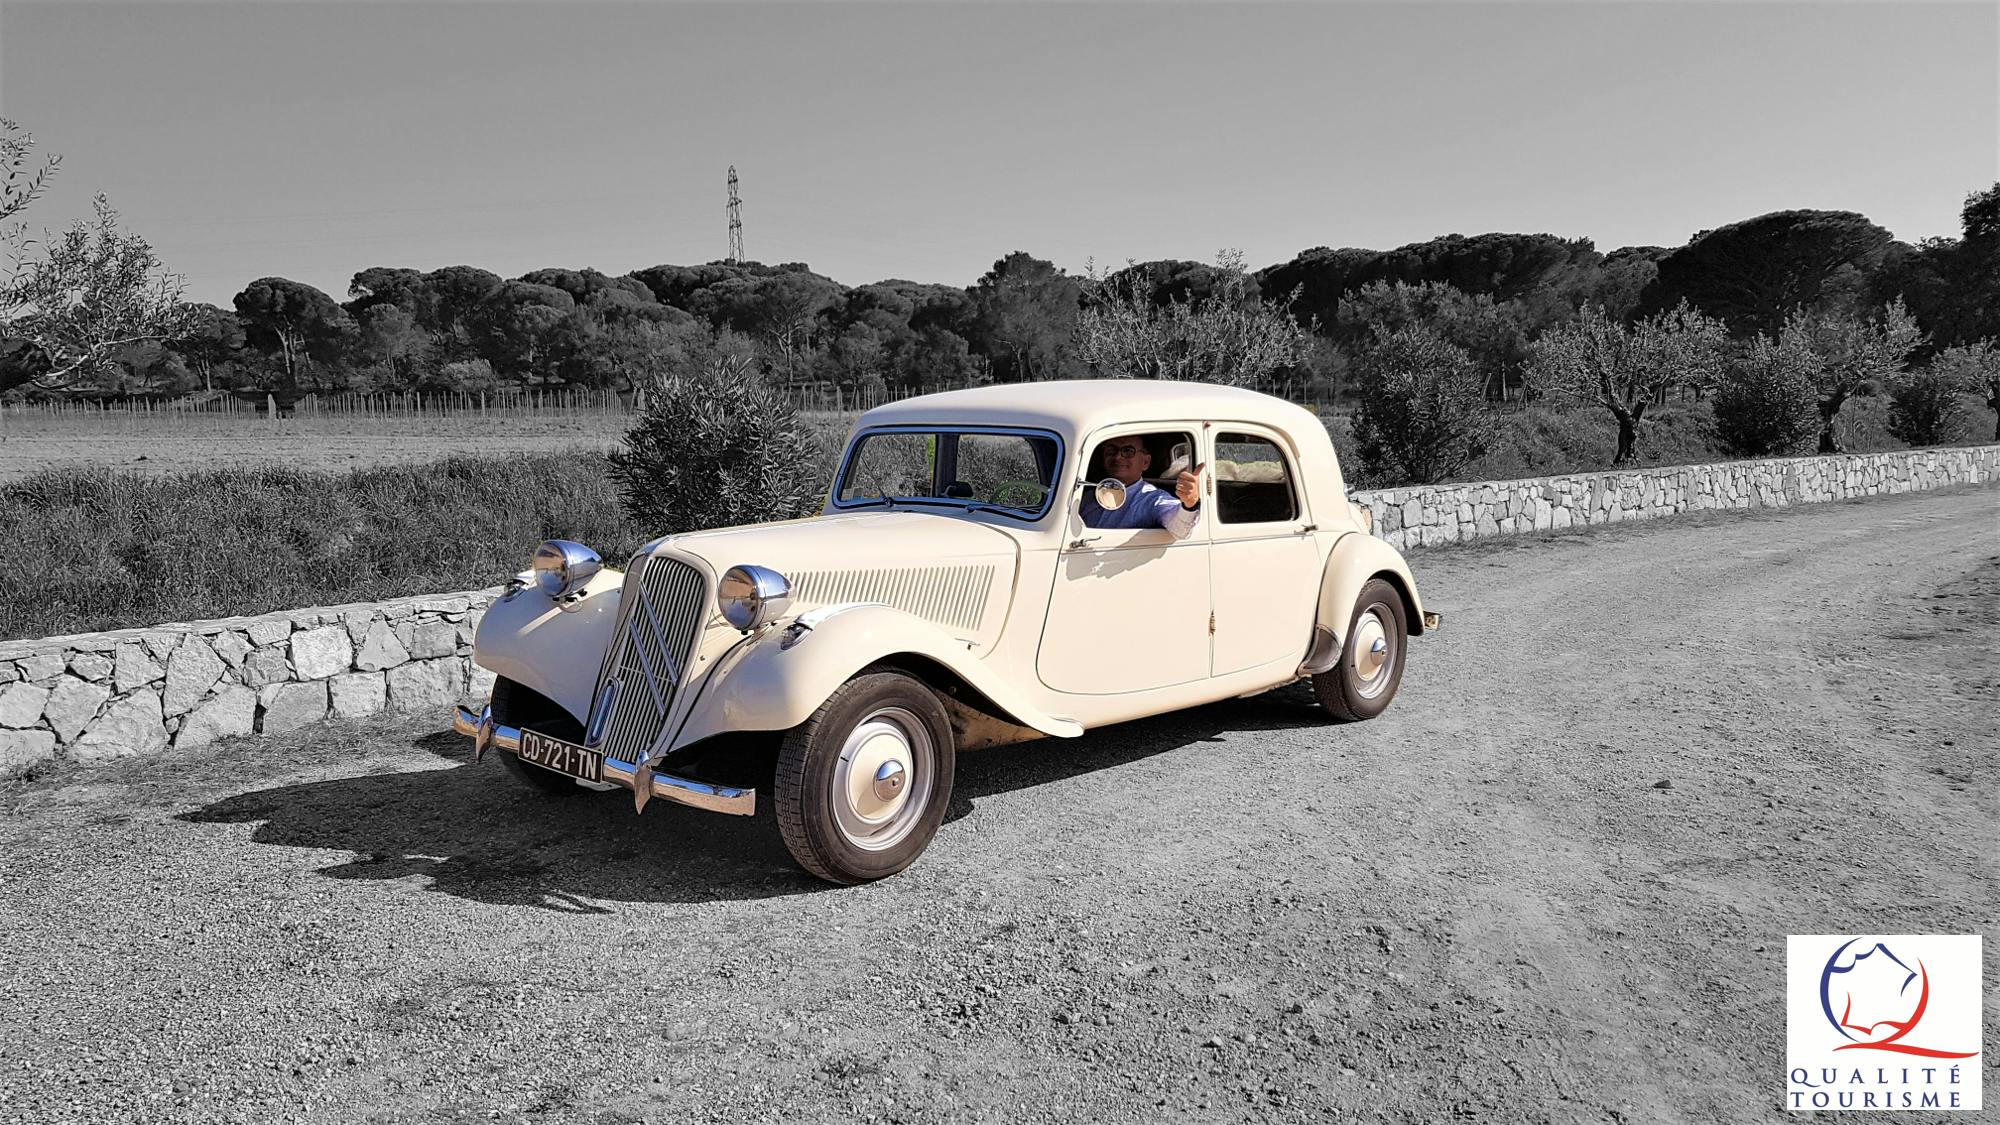 French Riviera private tour in a vintage car from Antibes